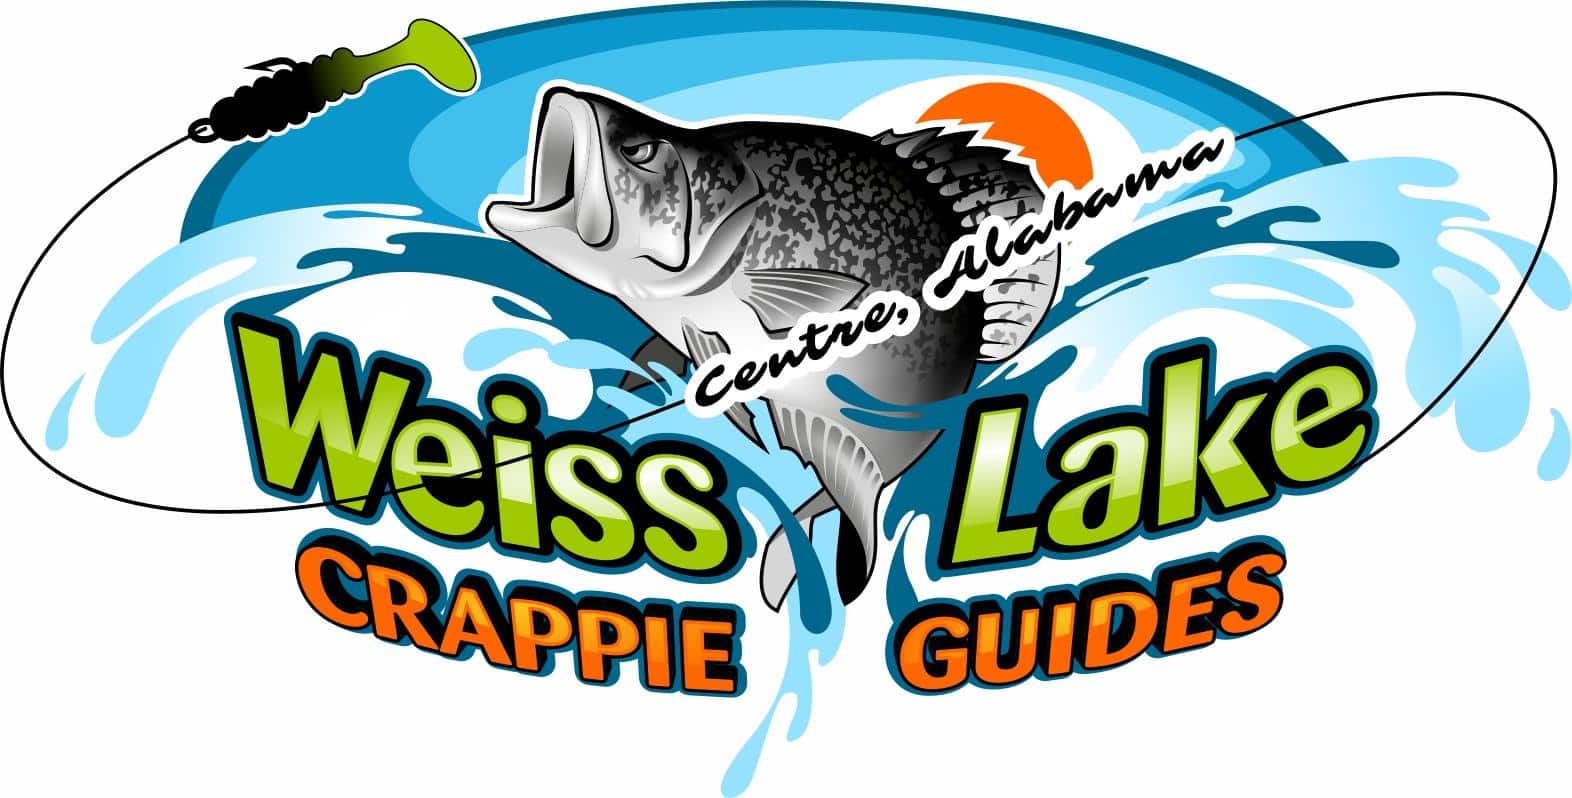 Weiss Lake Crappie Guides logo